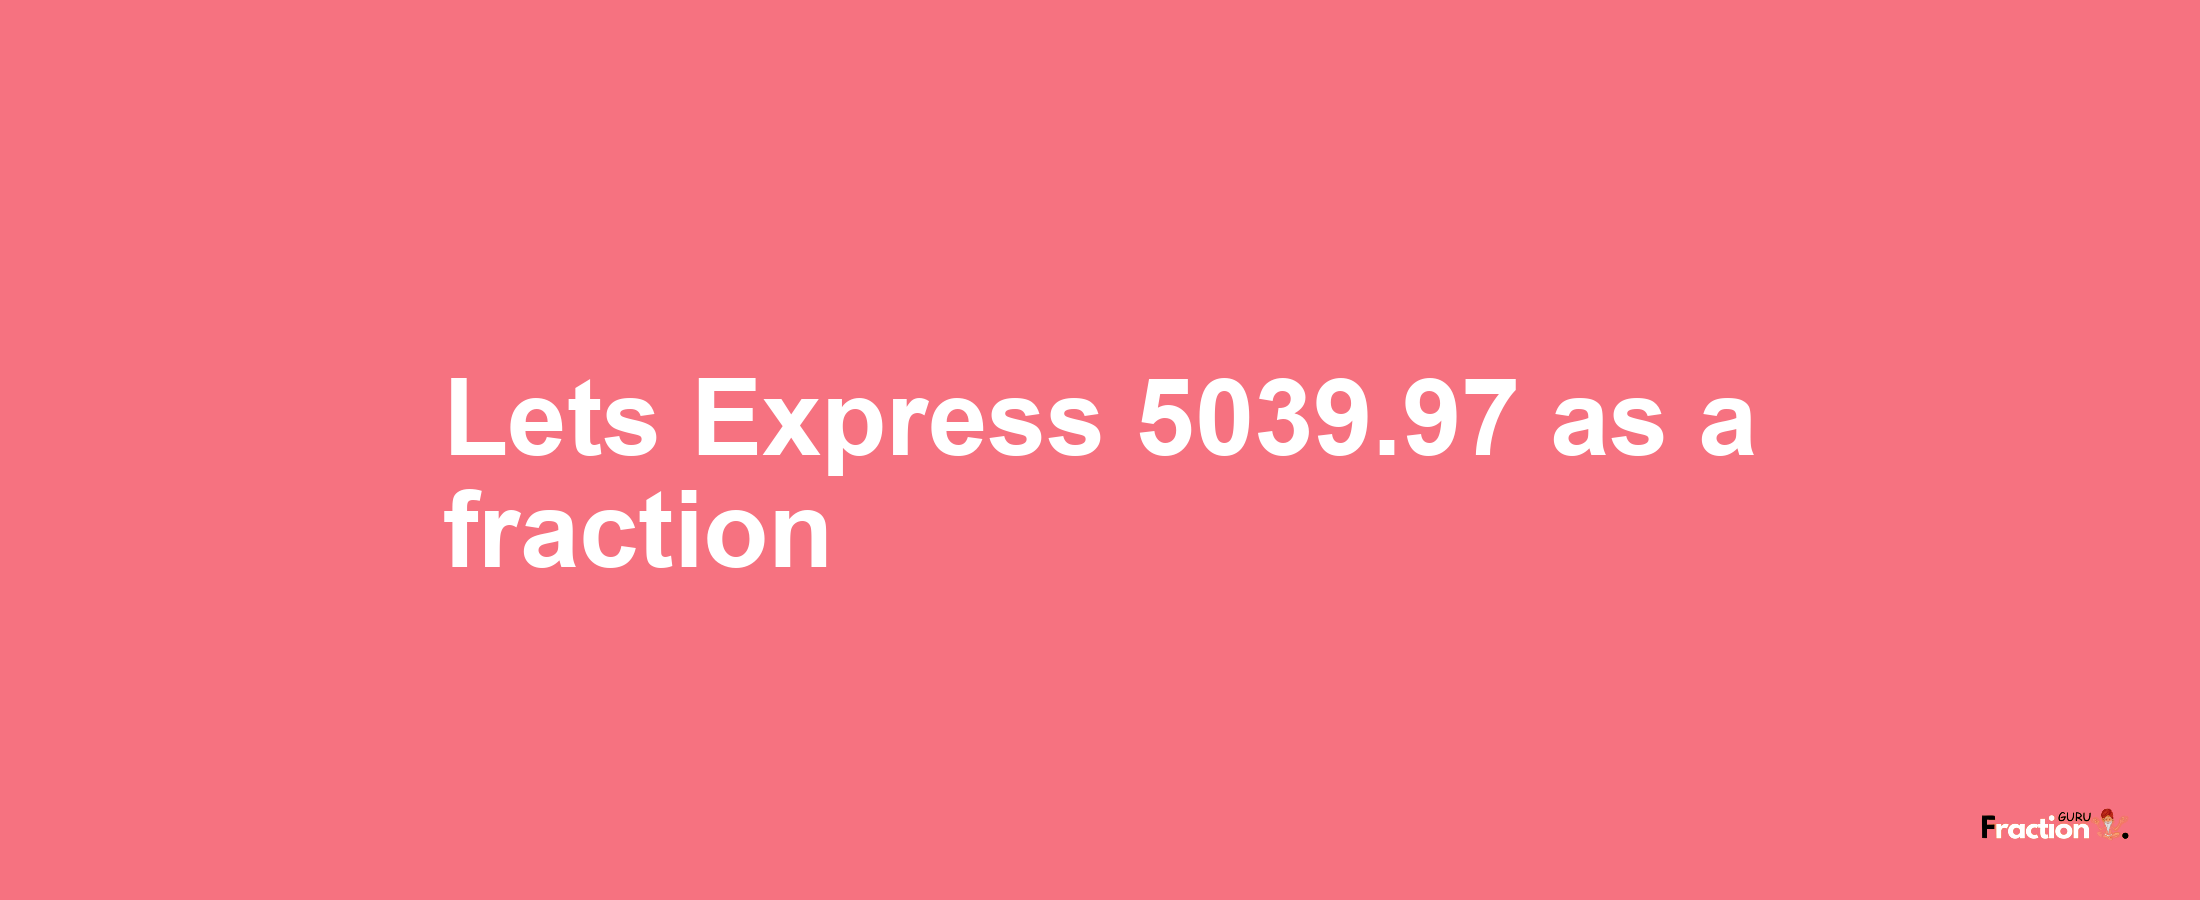 Lets Express 5039.97 as afraction